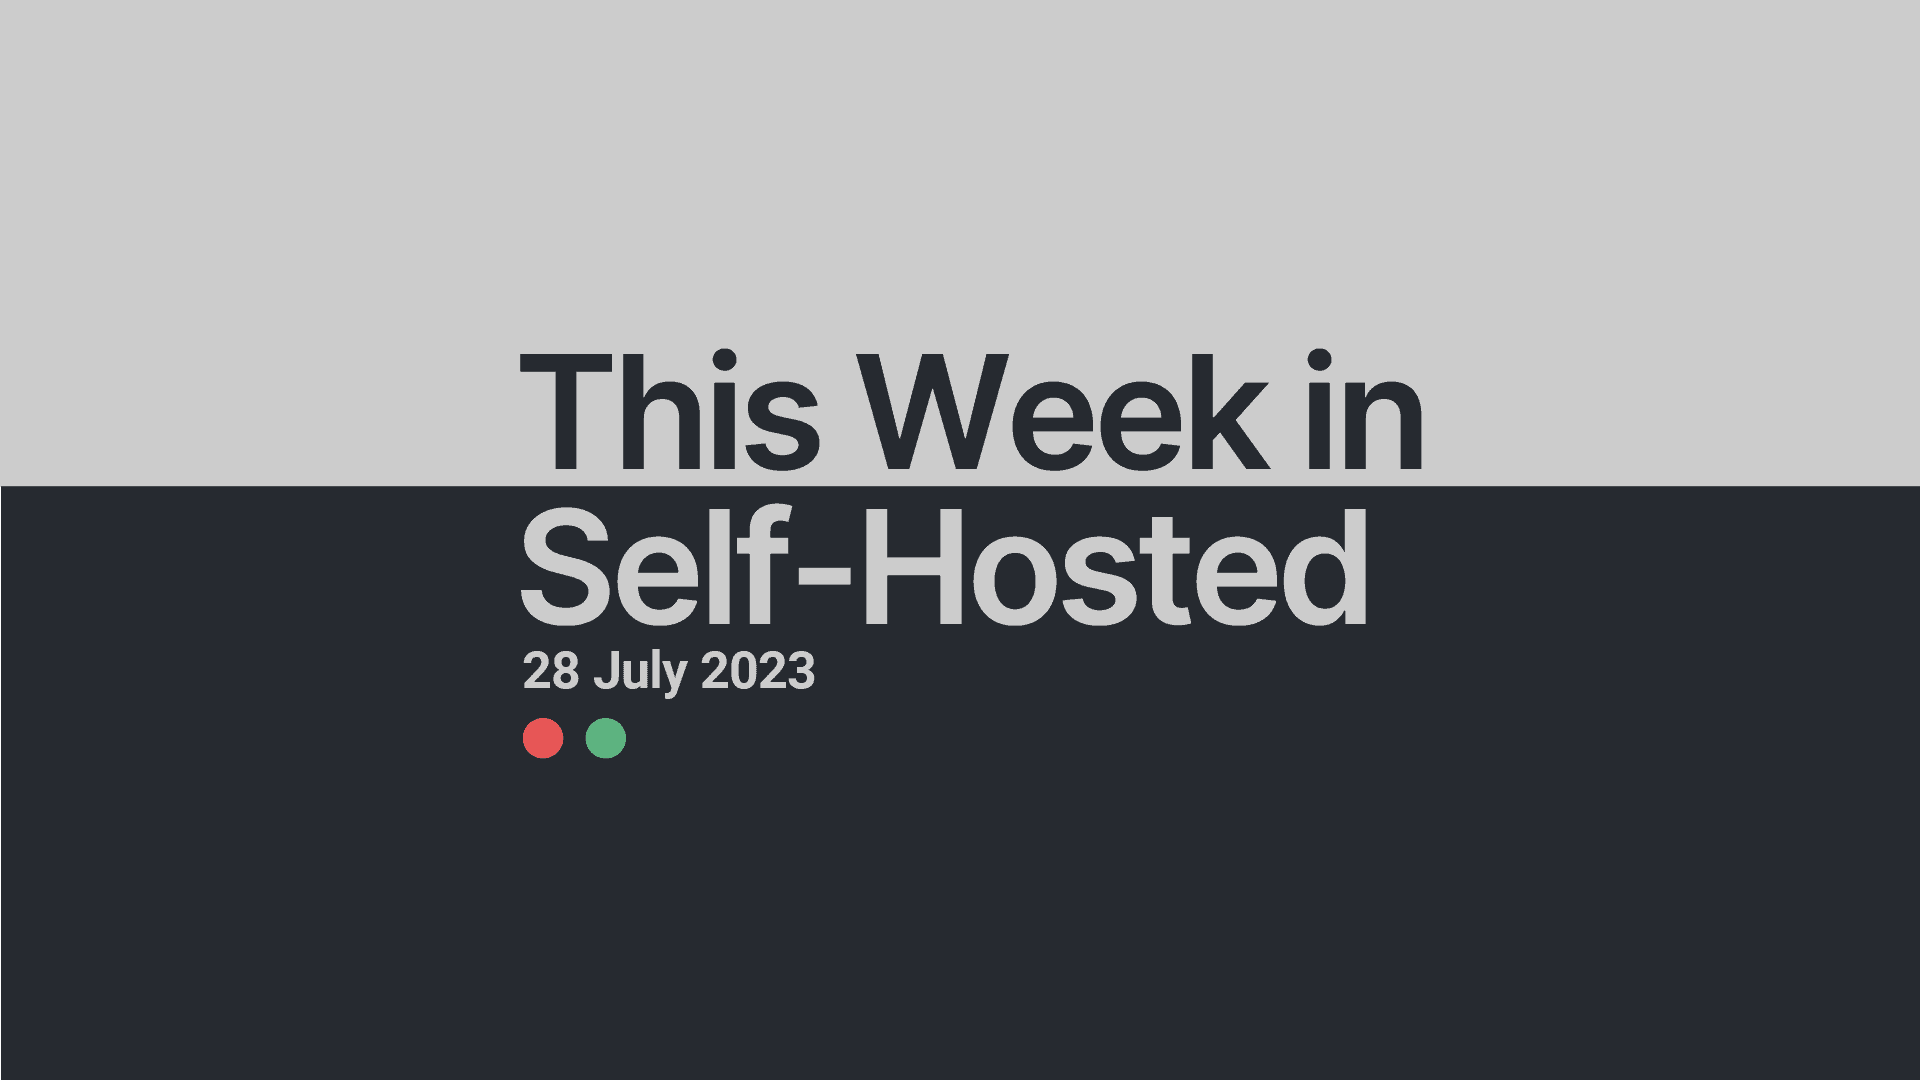 This Week in Self-Hosted (28 July 2023) Post image